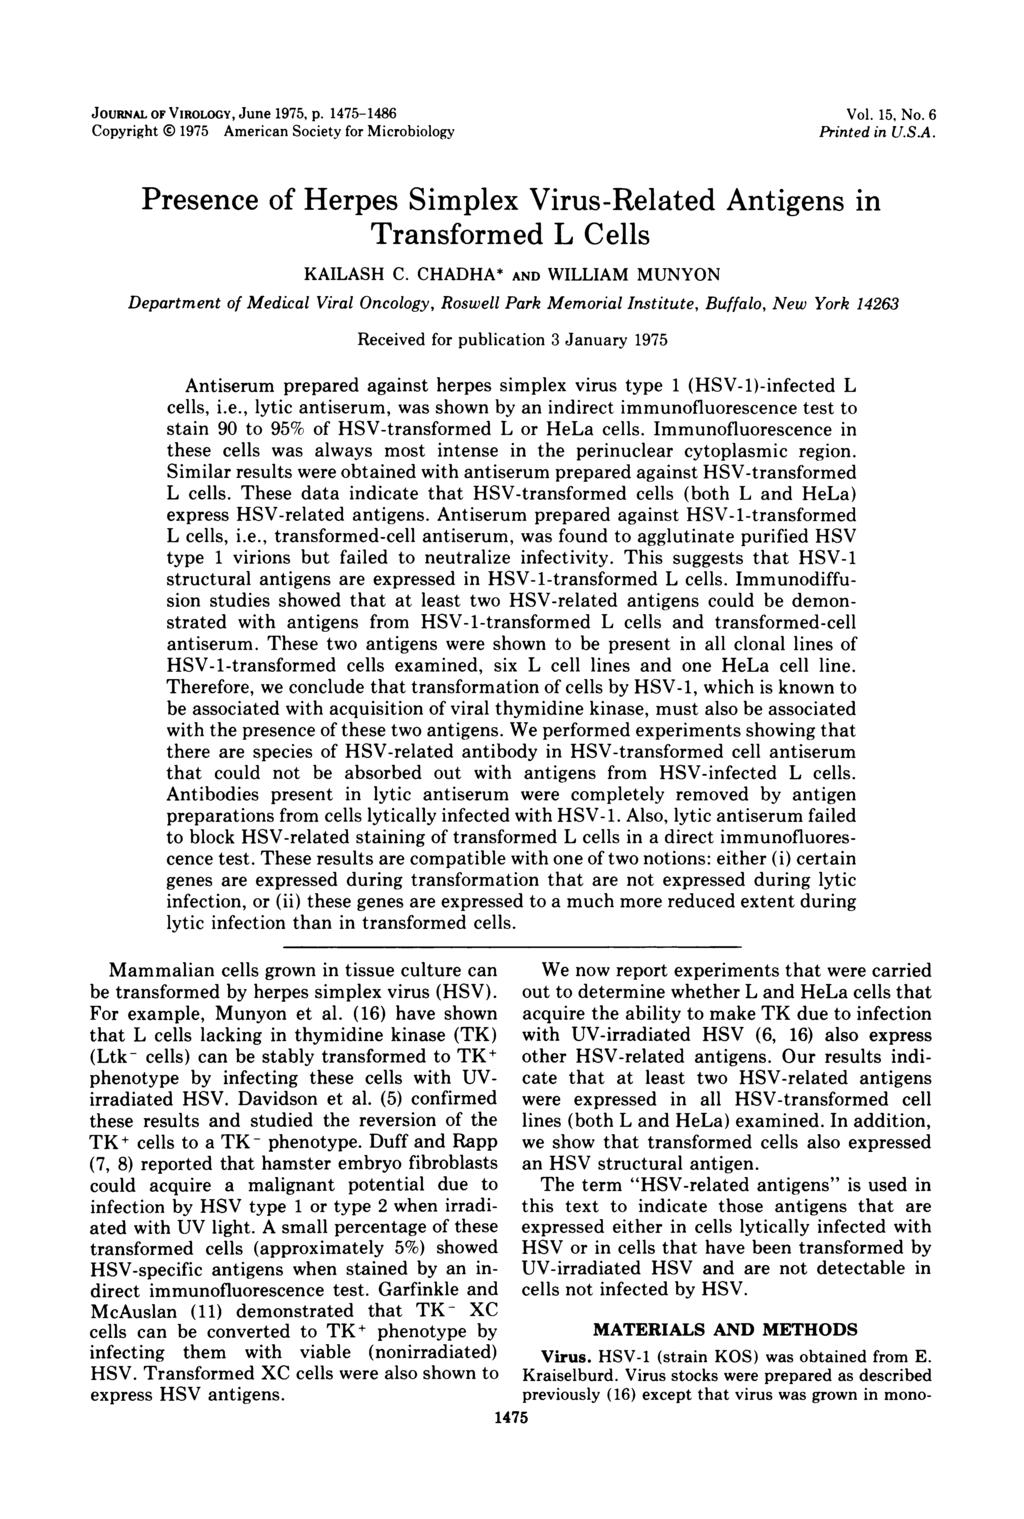 JOURNAL OF VIROLOGY, June 1975, p. 1475-1486 Copyright 1975 American Society for Microbiology Vol. 15, No. 6 Printed in U.S.A. Presence of Herpes Simplex Virus-Related Antigens in Transformed L Cells KAILASH C.